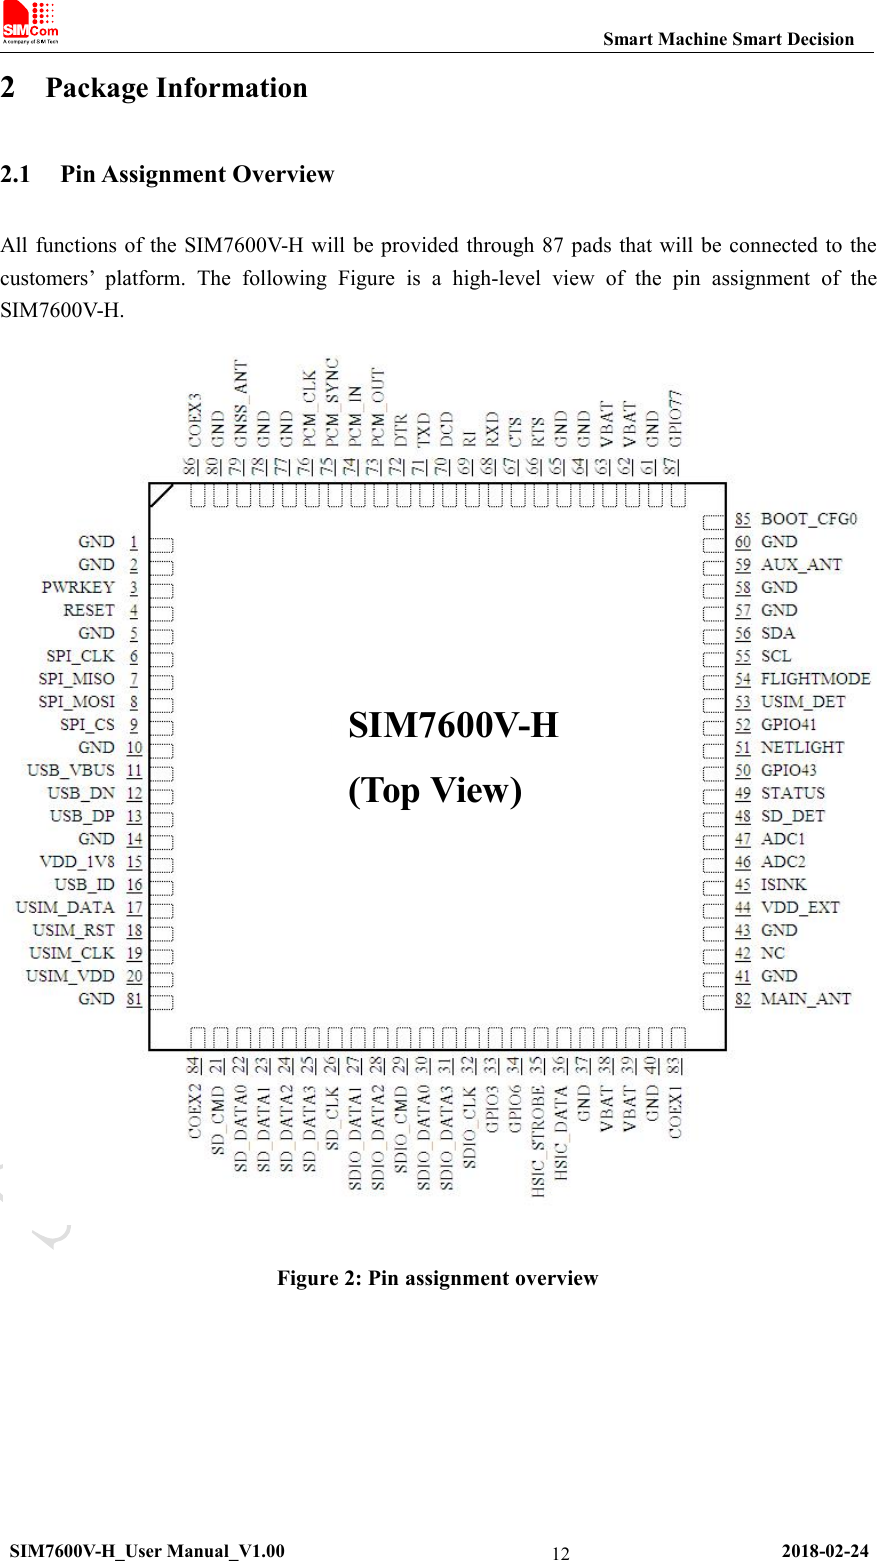 Smart Machine Smart DecisionSIM7600V-H_User Manual_V1.00 2018-02-24122Package Information2.1 Pin Assignment OverviewAll functions of the SIM7600V-H will be provided through 87 pads that will be connected to thecustomers’ platform. The following Figure is a high-level view of the pin assignment of theSIM7600V-H.Figure 2: Pin assignment overviewSIM7600V-H(Top View)